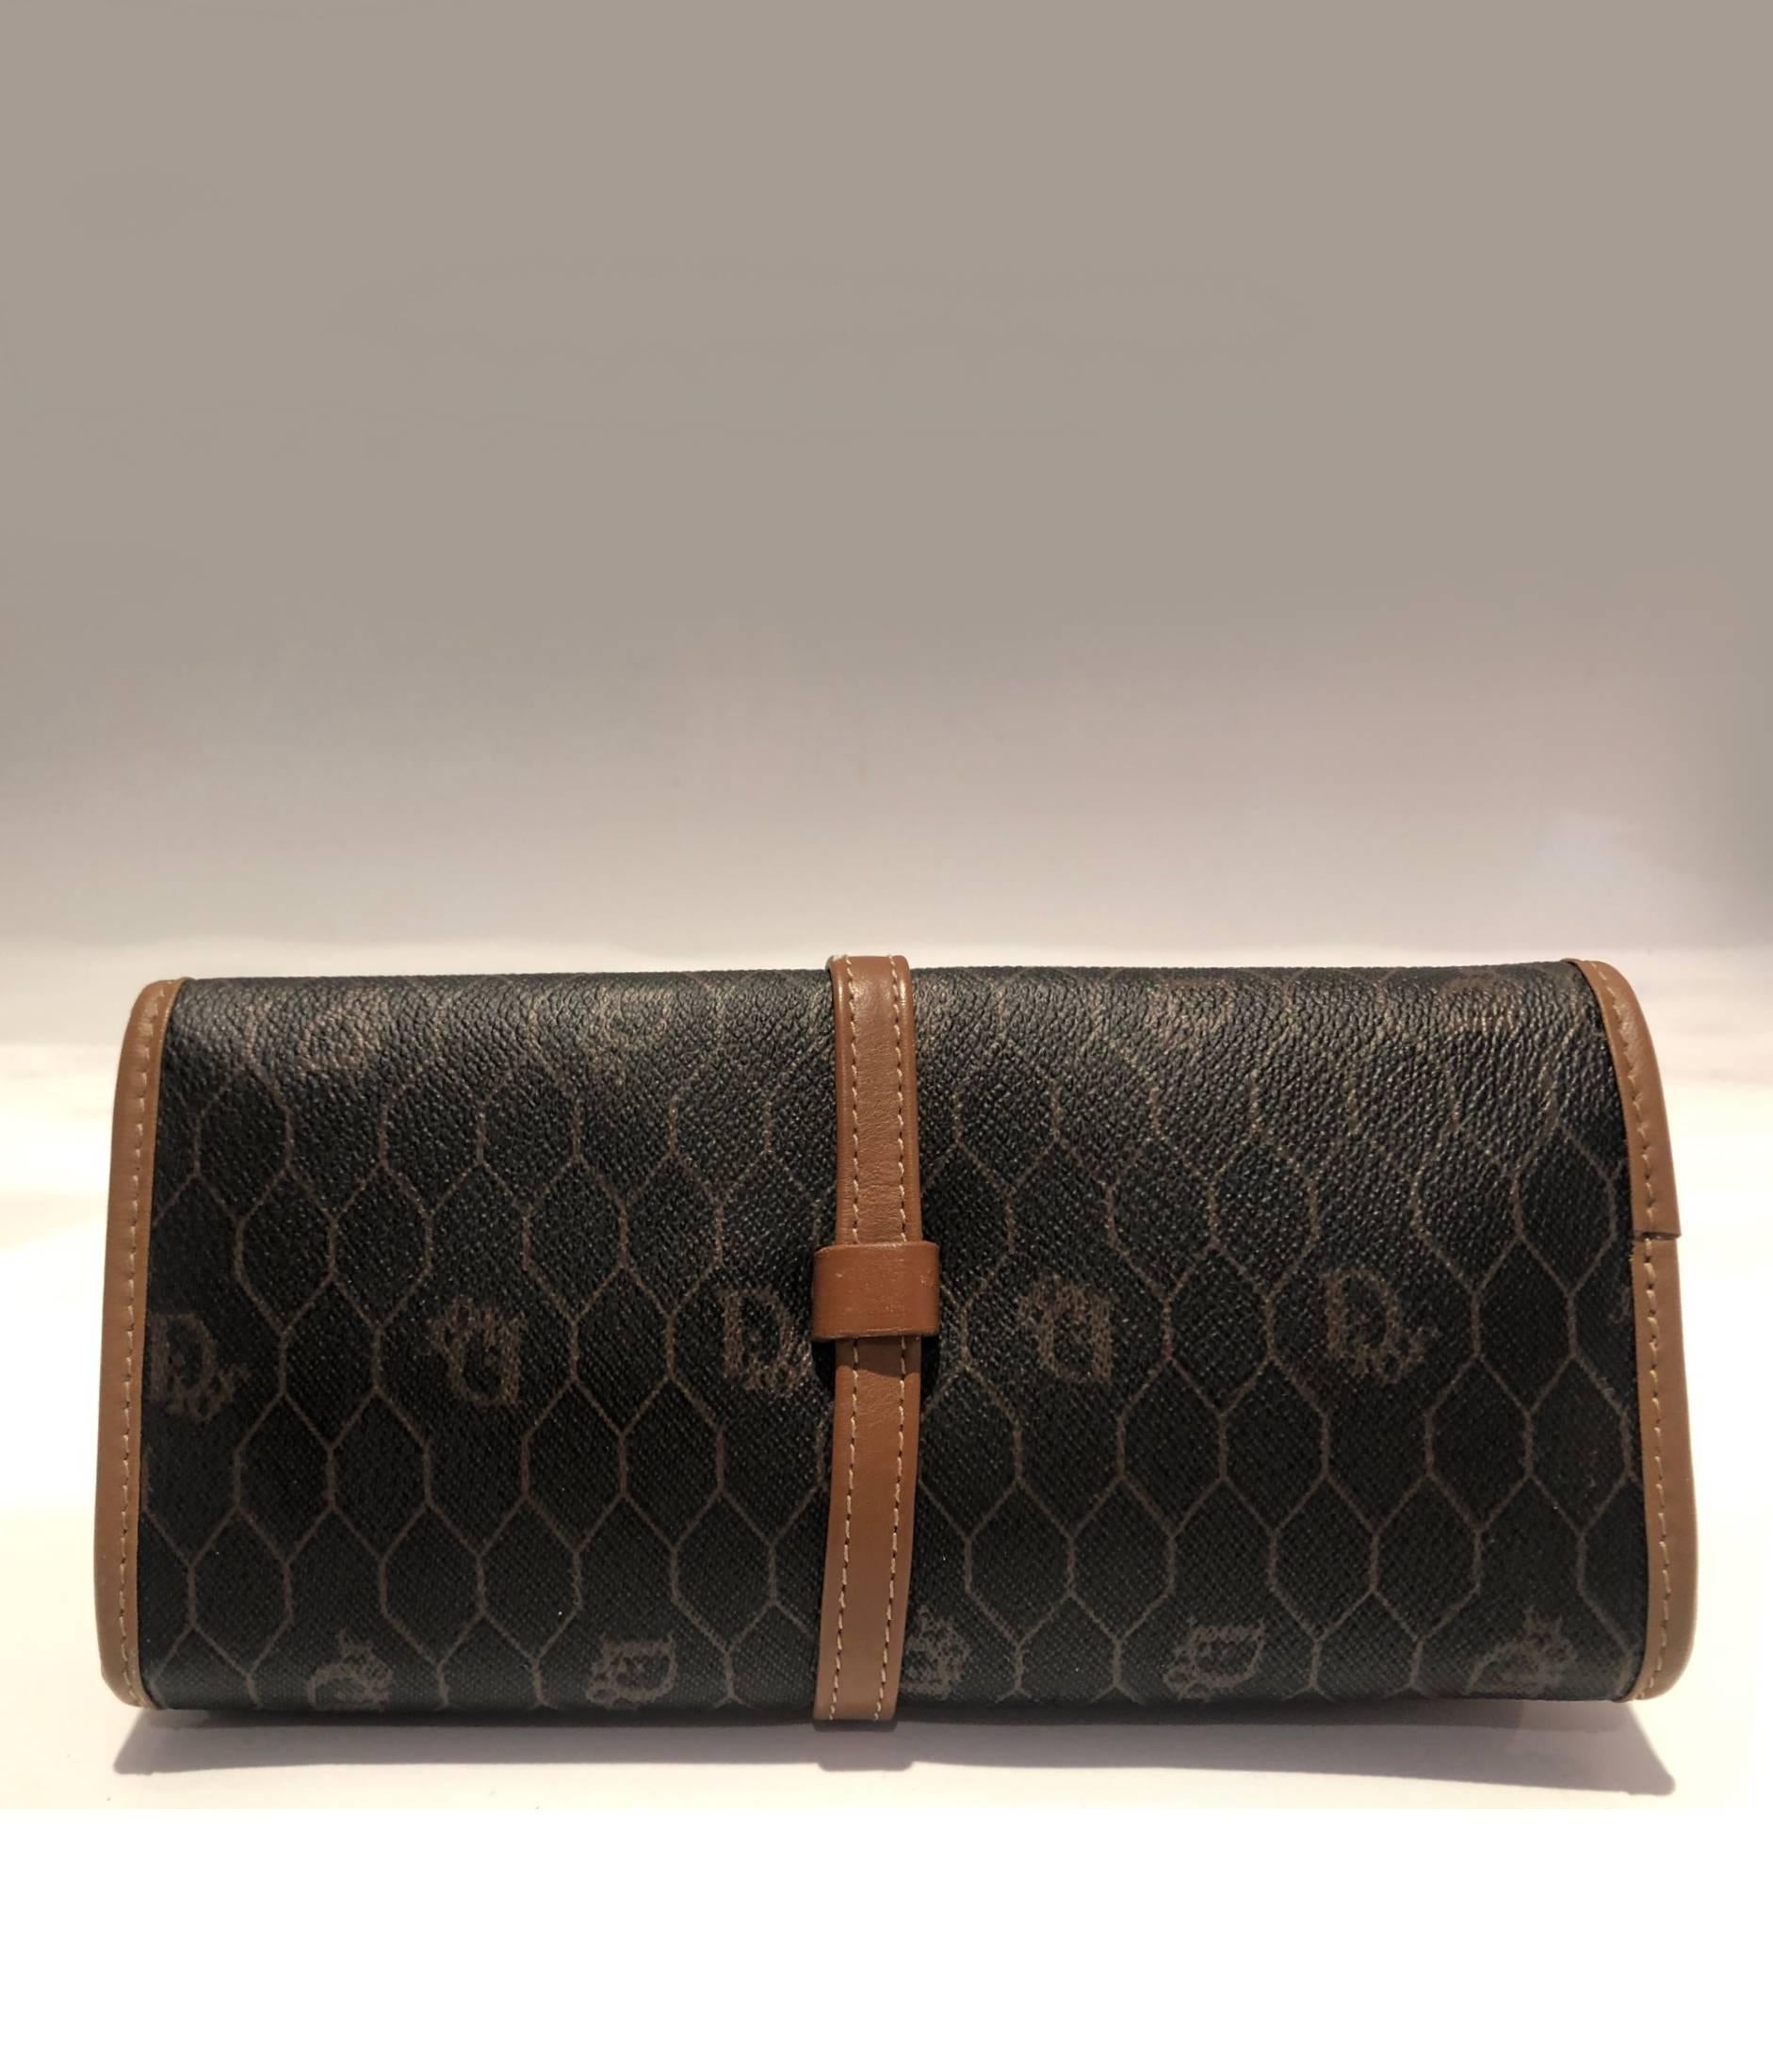 Christian Dior brown leather monogram jewellery wrap that can also be carried as a handbag, 5 different zipped compartments for your jewelry, coins, cards and notes. Interior in beautiful soft beige suede, all zips are perfectly working and in